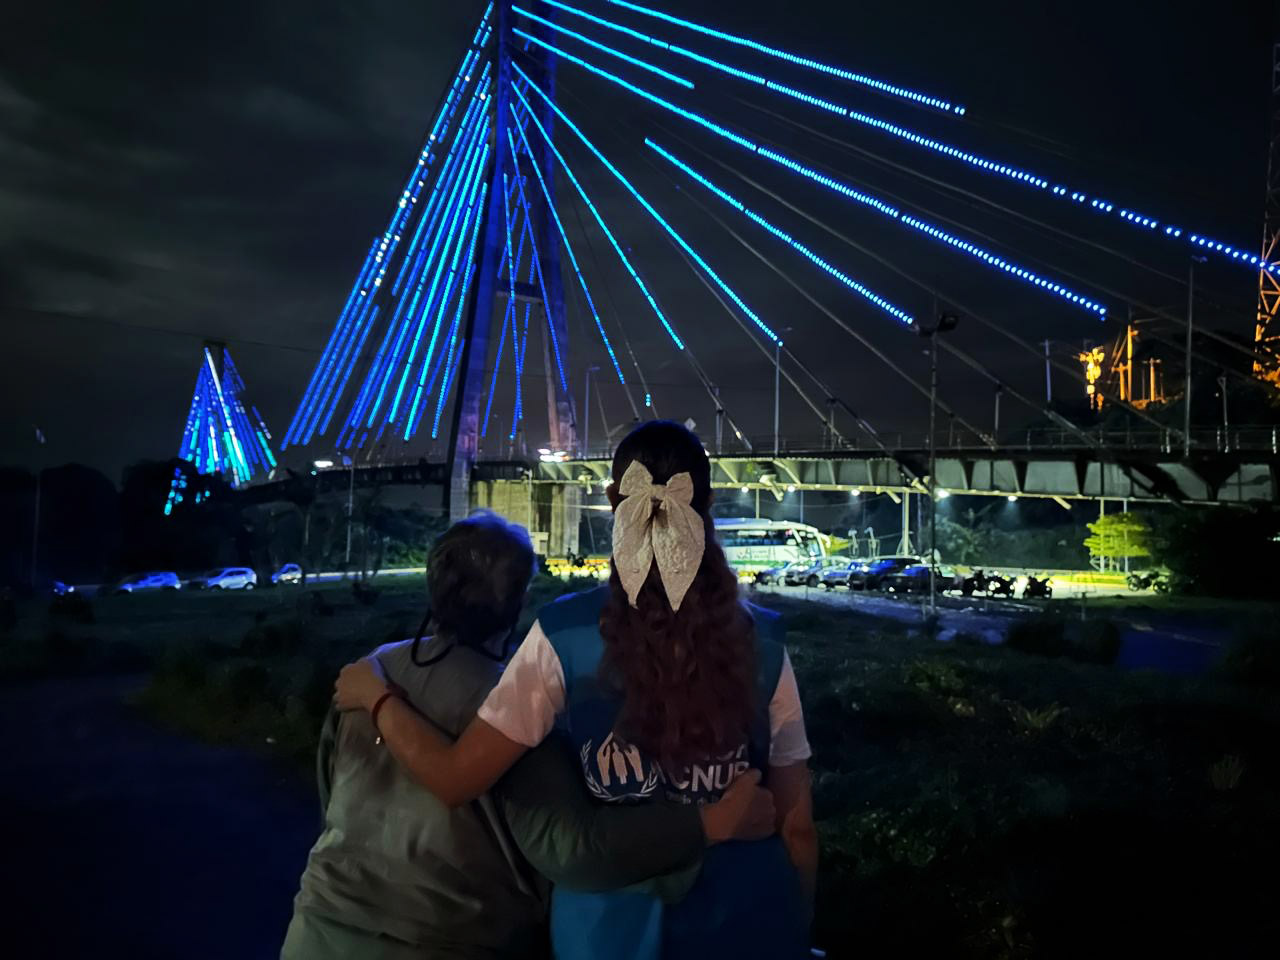 Two women embrace in front of a bridge lit in blue at night